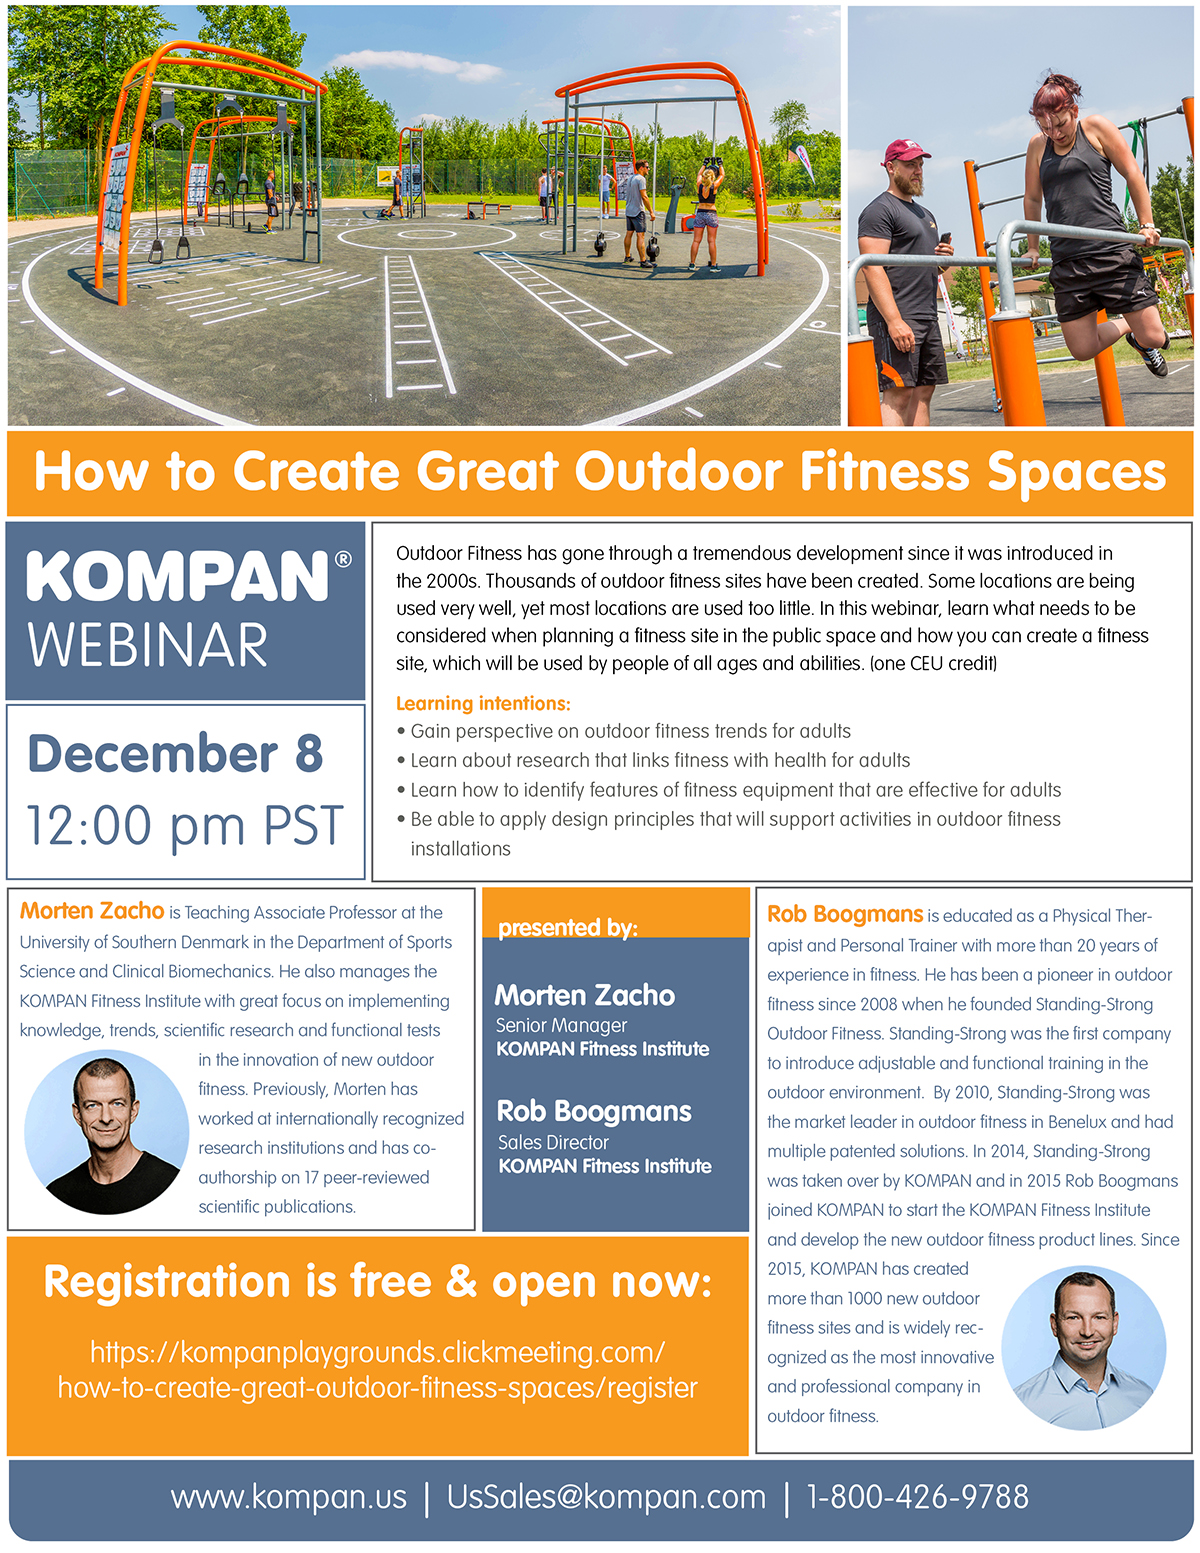 KOMPAN  Complete Outdoor Fitness Packages